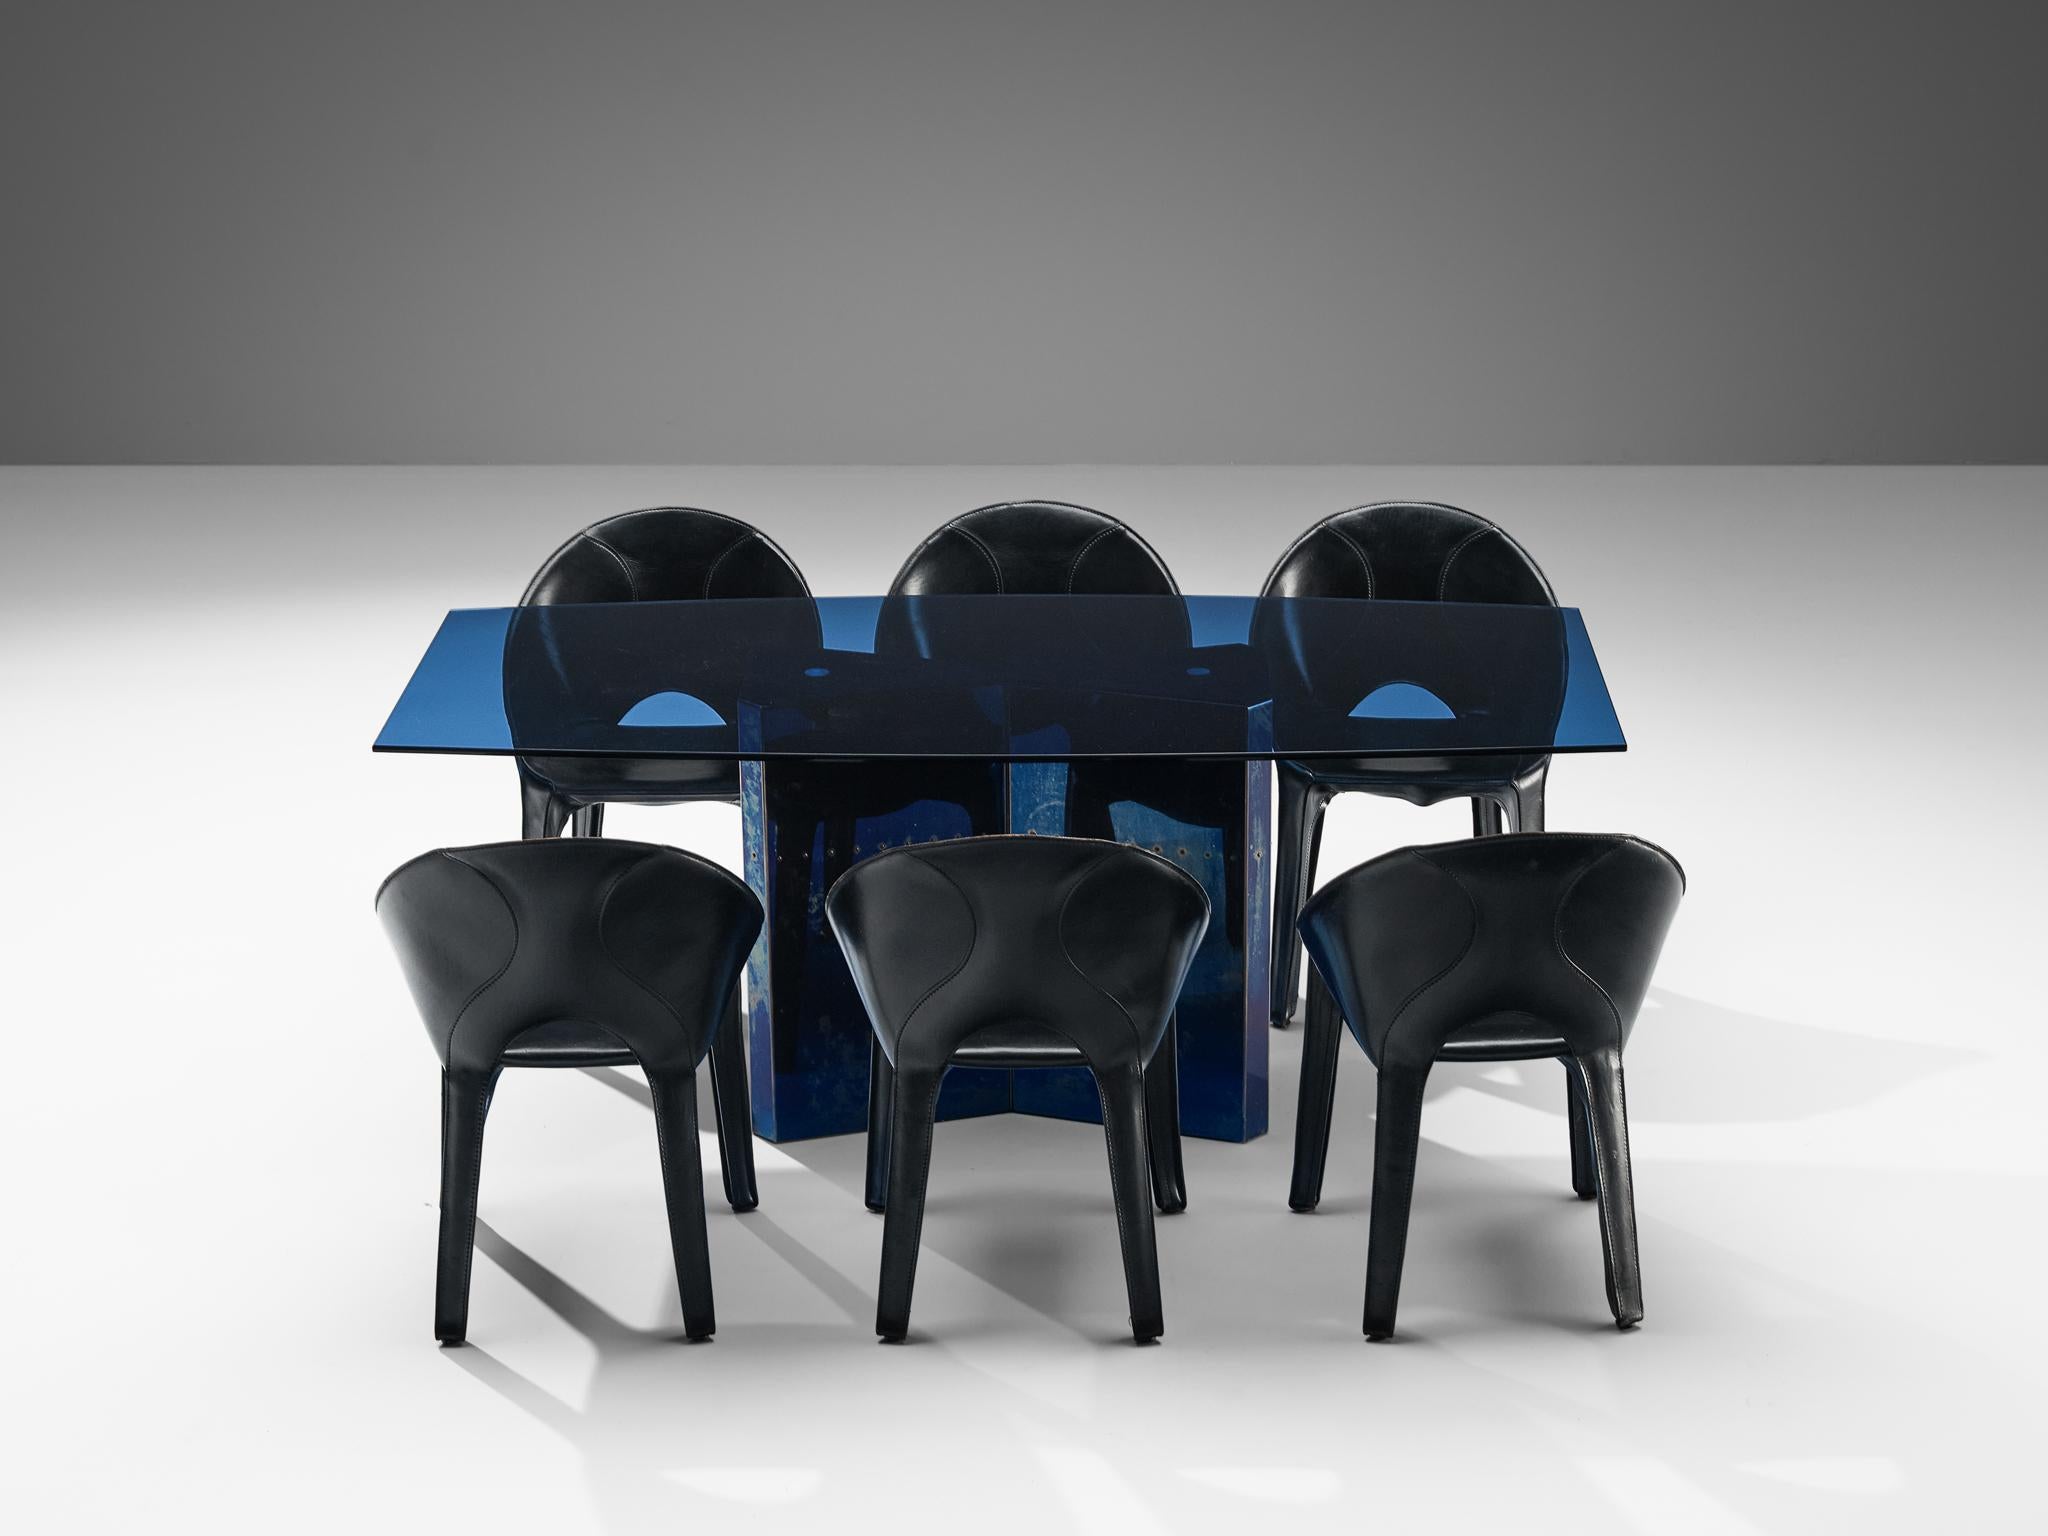 Steel Afra & Tobia Scarpa 'Polygonon' Dining Table & Mario Bellini Dining Chairs  For Sale